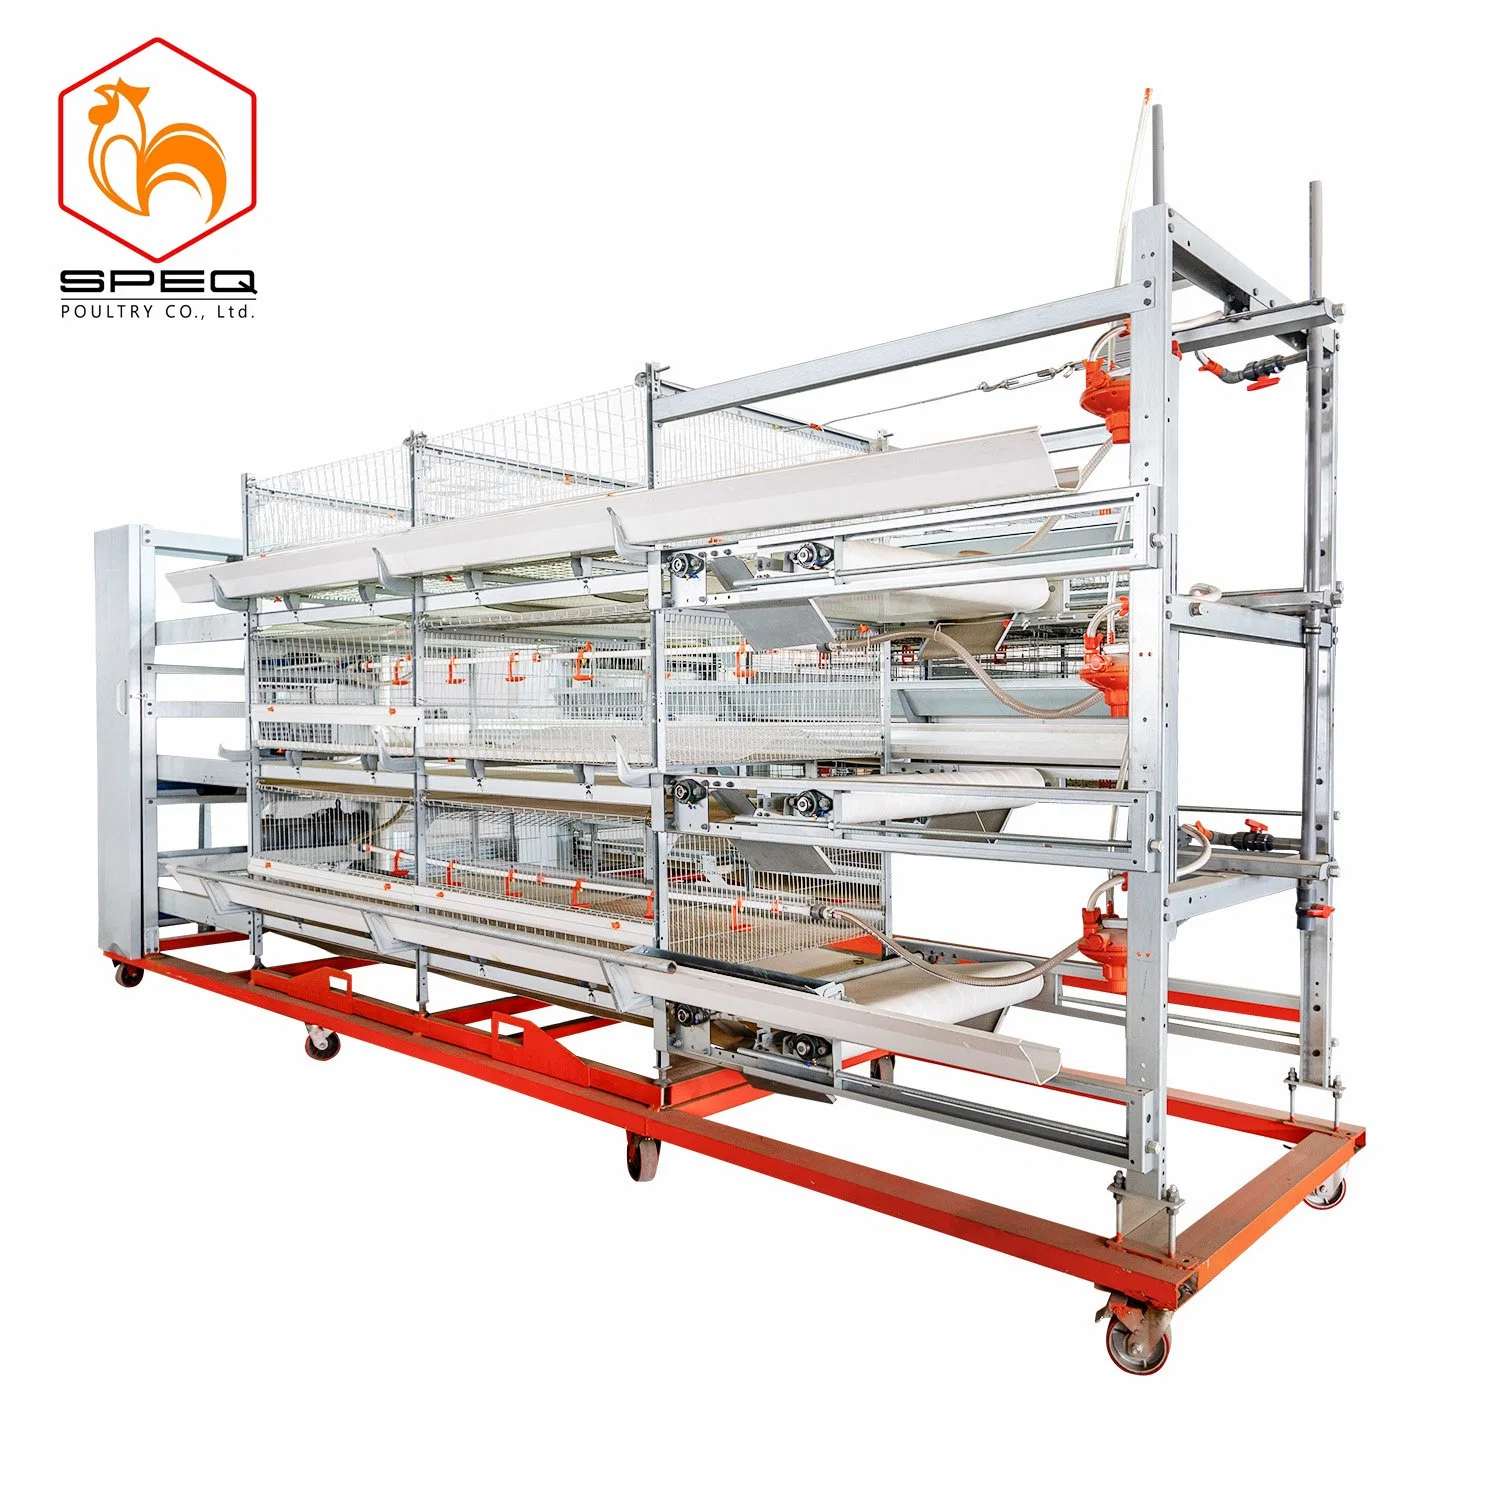 Automatic Poultry Farming Equipment Broiler Cage System with Manure Removal Belt